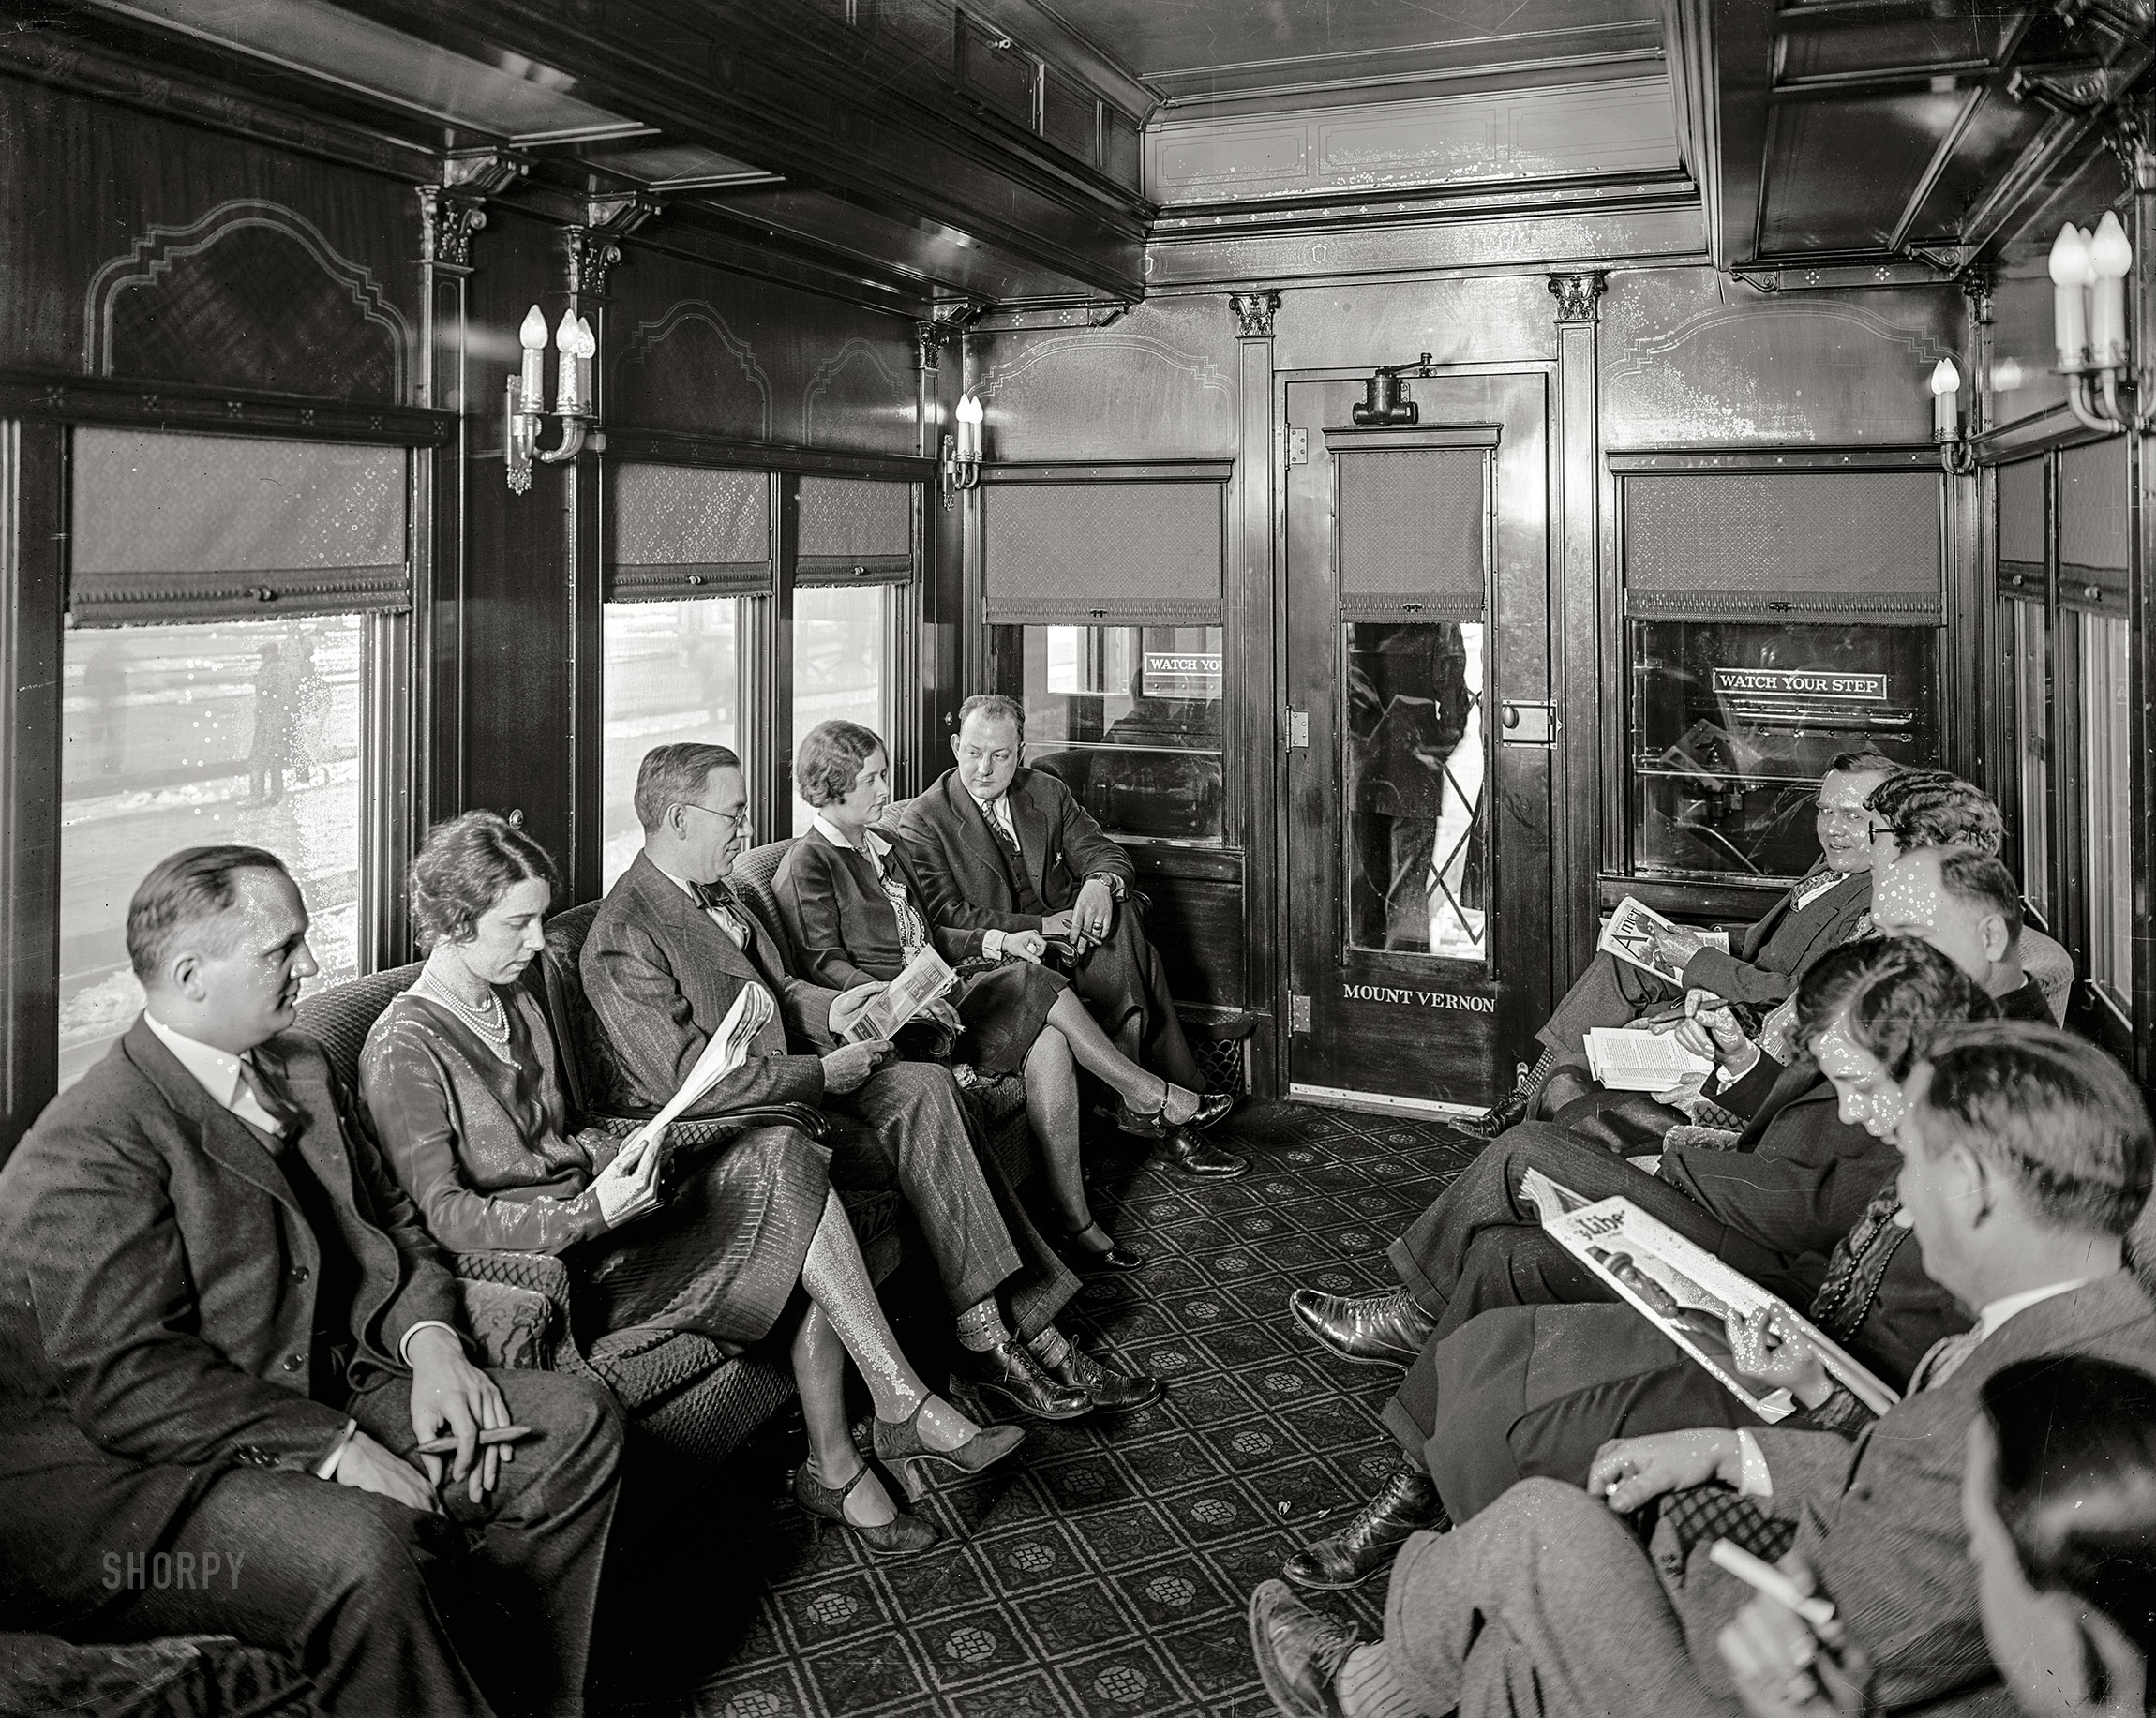 February 1928. Washington, D.C., or vicinity. "Southern Railway, interior of car." National Photo Company Collection glass negative. View full size.